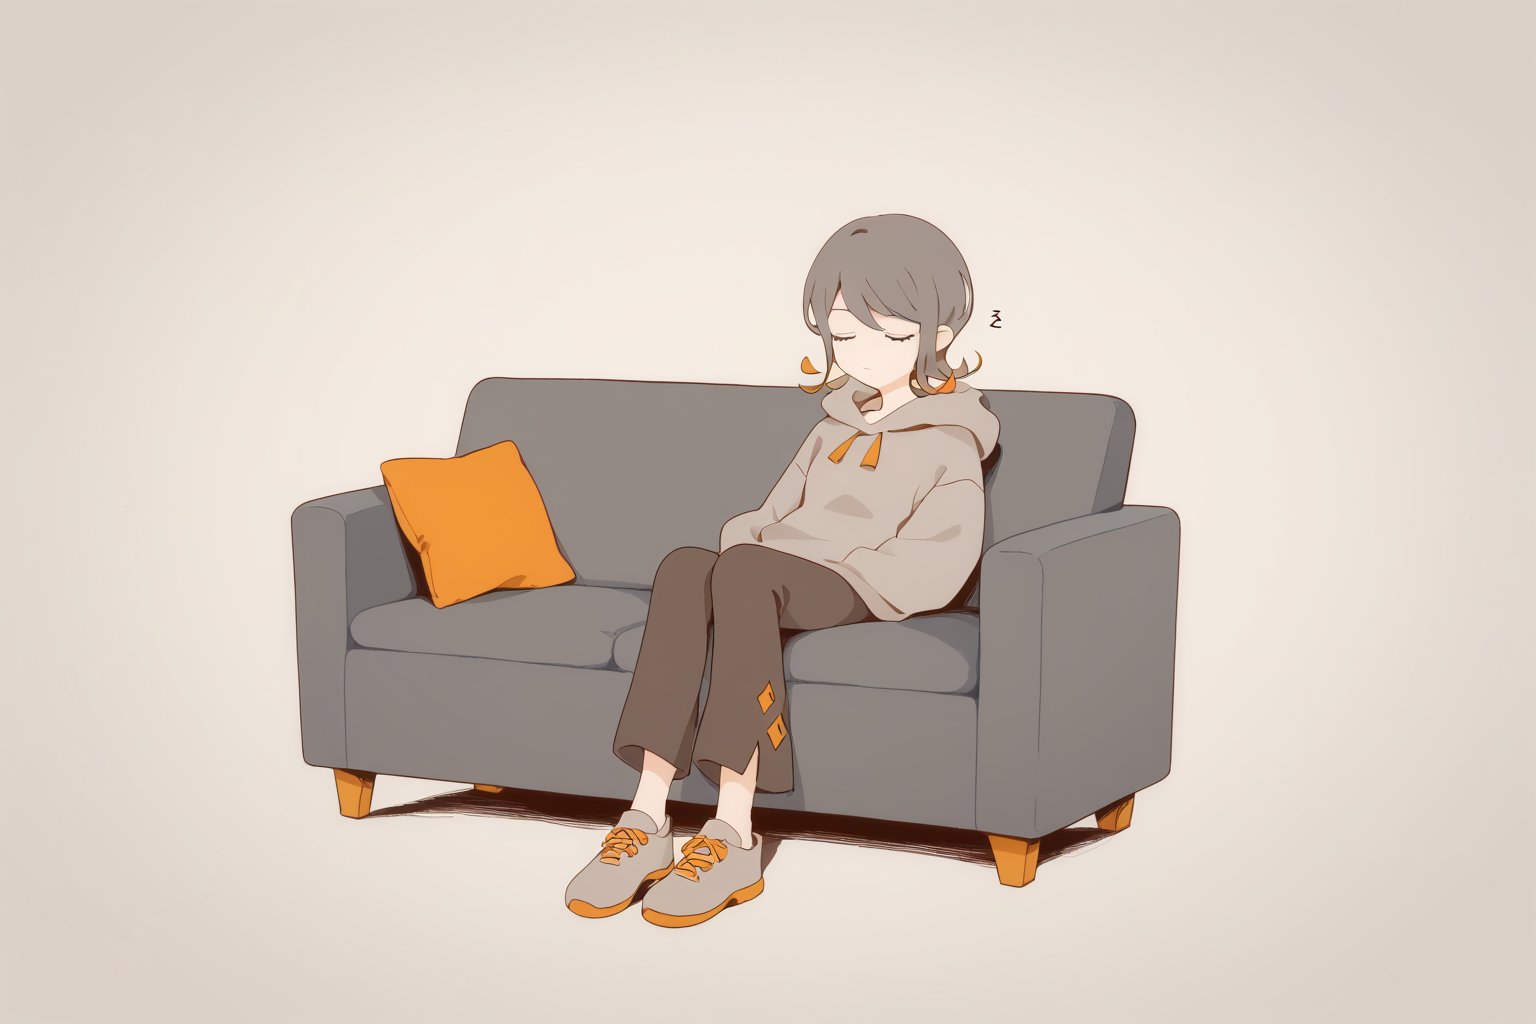 score_9_up,score_8_up, source_anime,spot_colors,solo,1girl,short-hair,multicolor_hair,two-tone-hair,grey_hair,orange_hair,bangs,Nira-Chan,brown_hair,full_body,grey_hoodie,pants,shoes,sitting,couch,grey_background,sleeping,closed_eyes